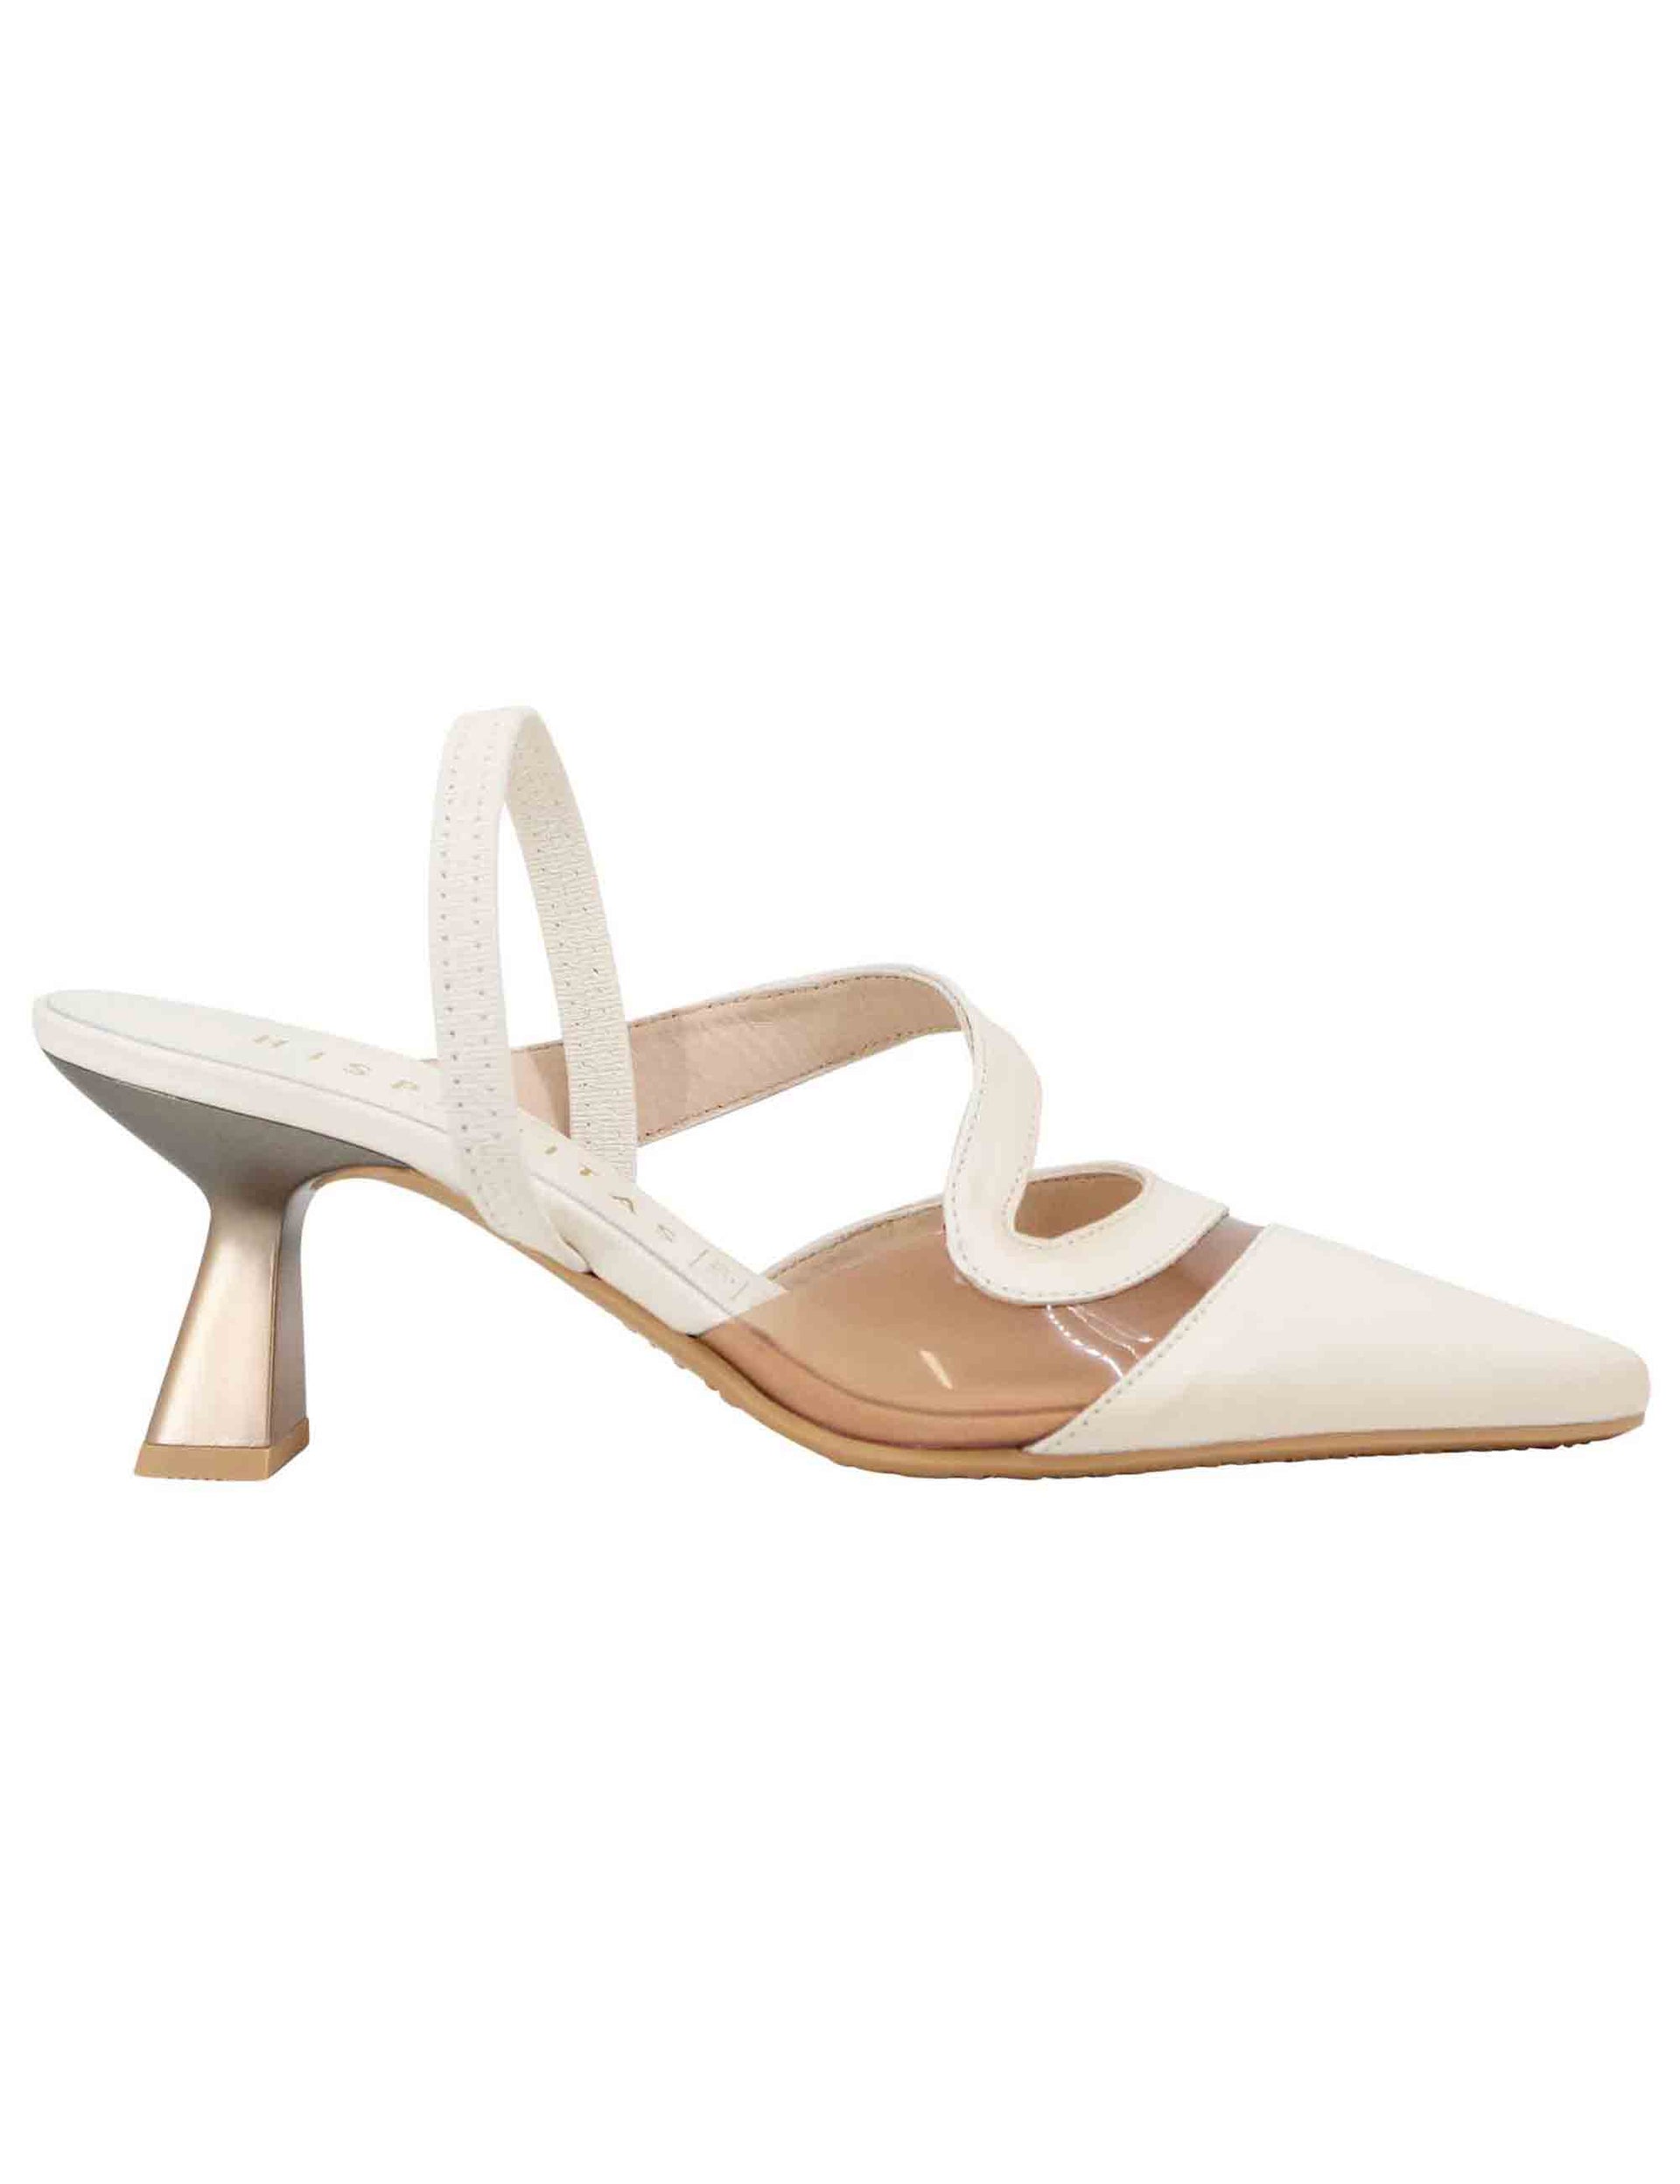 Women's slingback pumps in cream leather with elastic back